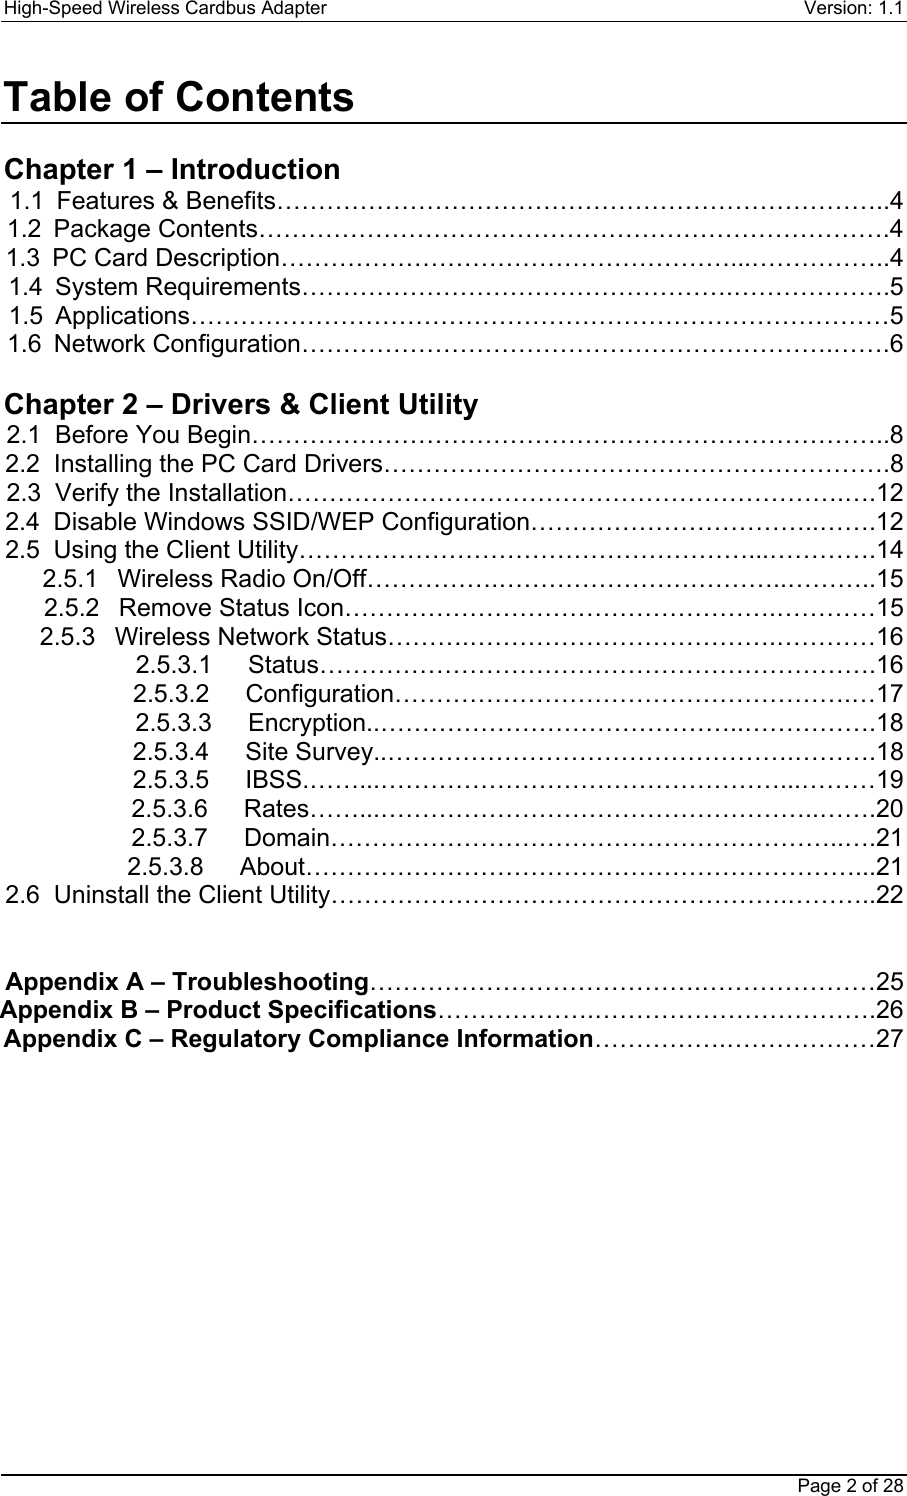 High-Speed Wireless Cardbus Adapter Version: 1.1Page 2 of 28Table of ContentsChapter 1 – Introduction1.1  Features &amp; Benefits………………………………………………………………..41.2 Package Contents………………………………………………………………….41.3  PC Card Description………………………………………………...……………..41.4 System Requirements…………………………………………….……………….51.5 Applications…………………………………………………………………………51.6 Network Configuration……………………………………………………….…….6Chapter 2 – Drivers &amp; Client Utility2.1  Before You Begin…………………………………………………………………..82.2  Installing the PC Card Drivers…………………………………………………….82.3  Verify the Installation………………………………………………………….….122.4  Disable Windows SSID/WEP Configuration……………………………..…….122.5  Using the Client Utility………………………………………………...………….142.5.1  Wireless Radio On/Off…………….……………………………..………..152.5.2  Remove Status Icon…………………………………………….…………152.5.3  Wireless Network Status……….……………………………….…………162.5.3.1 Status………………………………………………………….162.5.3.2 Configuration……………………………………………….…172.5.3.3 Encryption..……………………………………..…………….182.5.3.4 Site Survey..………………………………………….……….182.5.3.5 IBSS.……...…………………………………………...………192.5.3.6 Rates……...……………………………………………..…….202.5.3.7 Domain……………………………………………………..….212.5.3.8 About…………………………………………………………...212.6  Uninstall the Client Utility……………………………………………….………..22Appendix A – Troubleshooting………………………………….…………………25Appendix B – Product Specifications……………….…………………………….26Appendix C – Regulatory Compliance Information…………….………………27